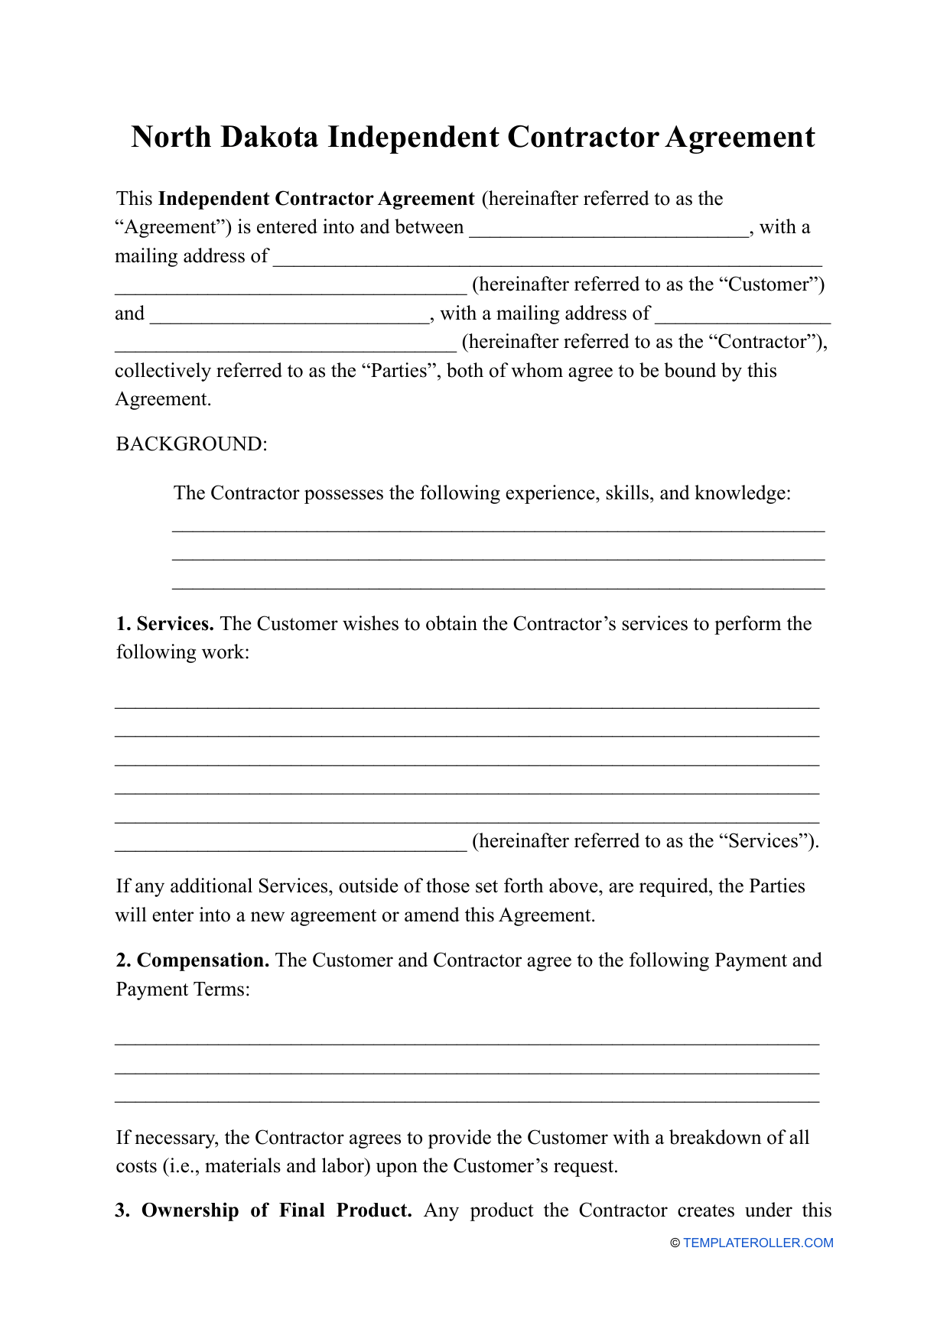 Independent Contractor Agreement Template - North Dakota, Page 1